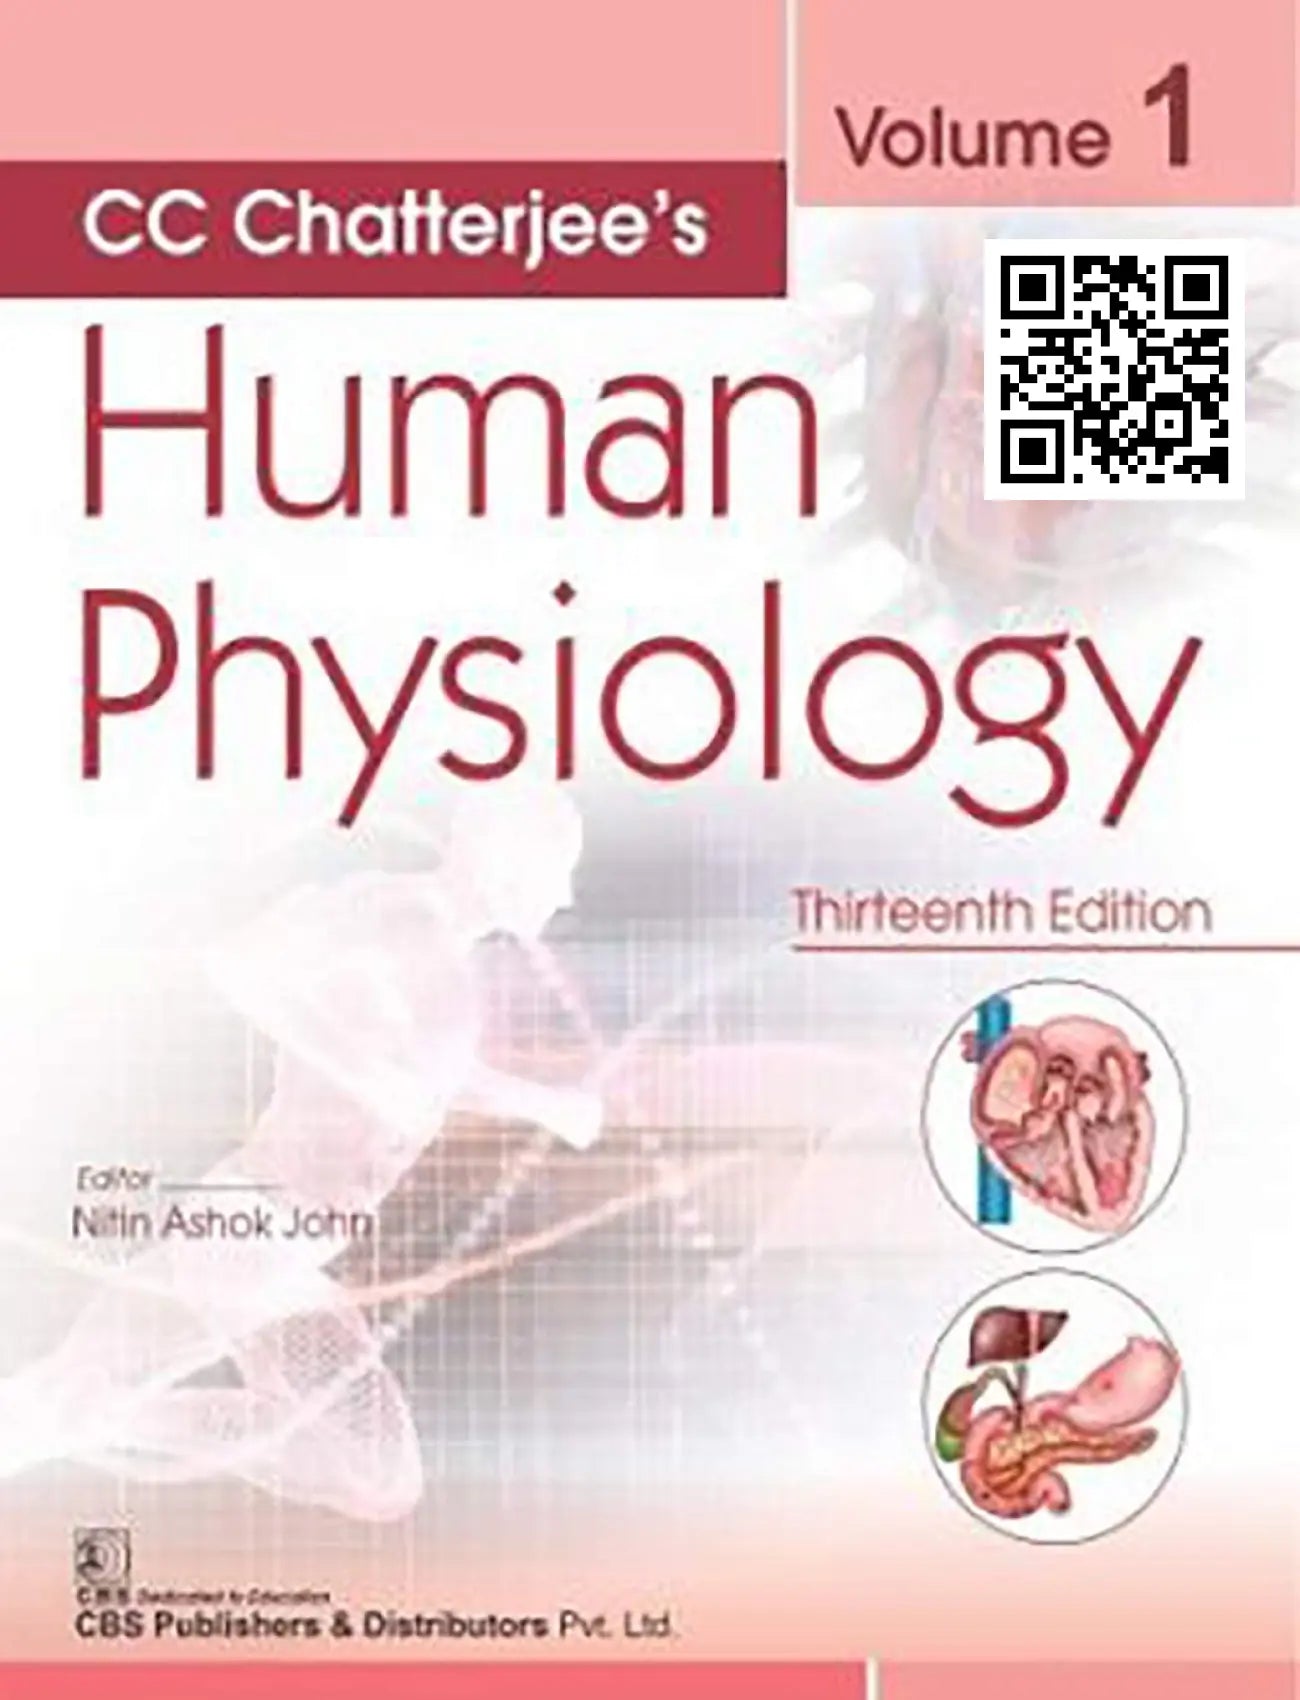 C C Chatterjees Human Physiology 13ed Vol 1 and 2 (Set Of 2 Books)